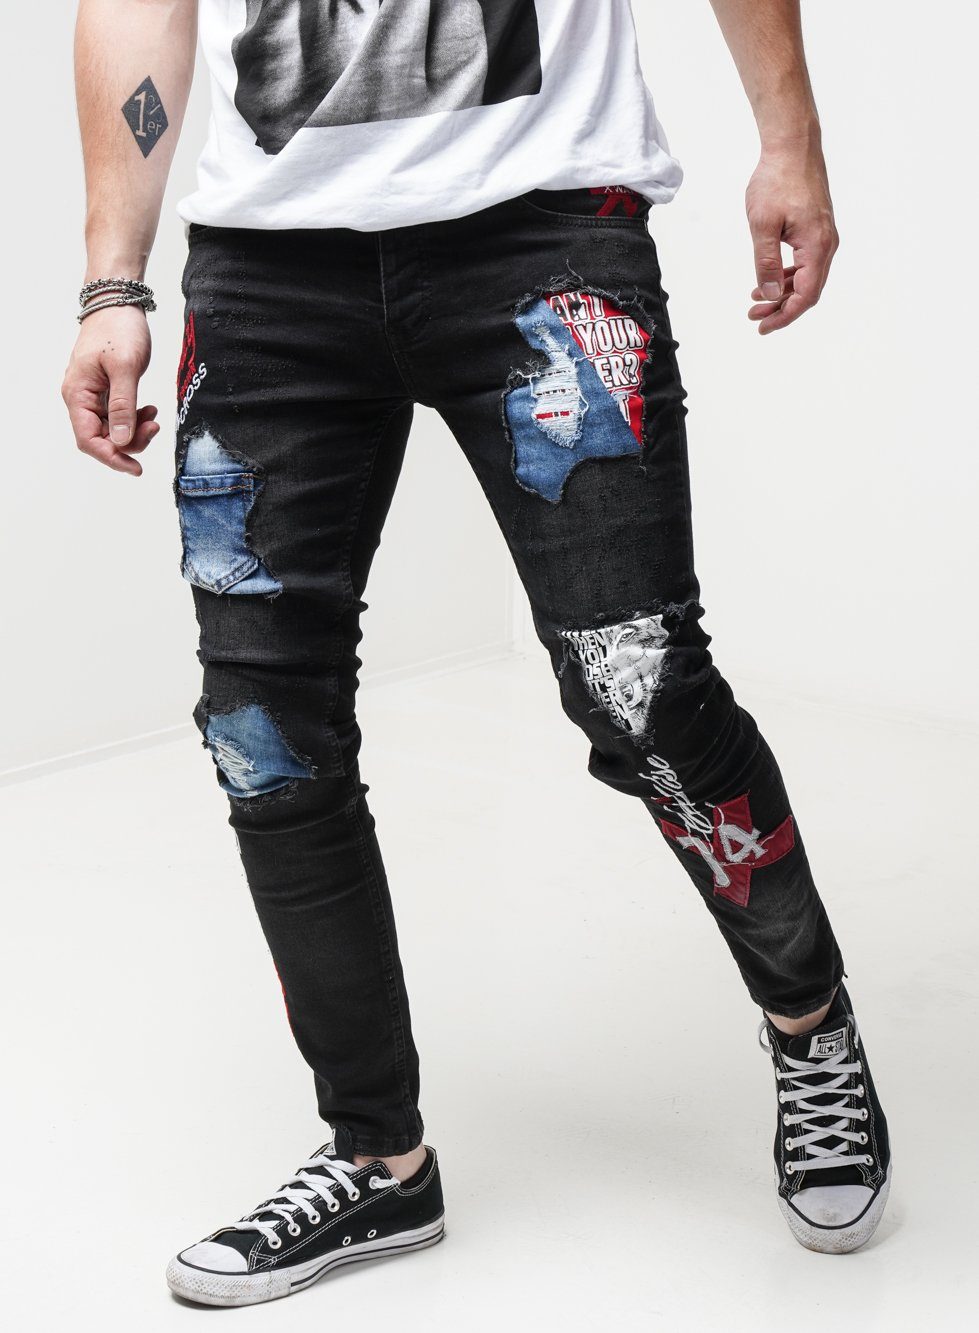 A man rocking INSIDER ripped jeans in a skinny fit, paired with a casual white t-shirt.